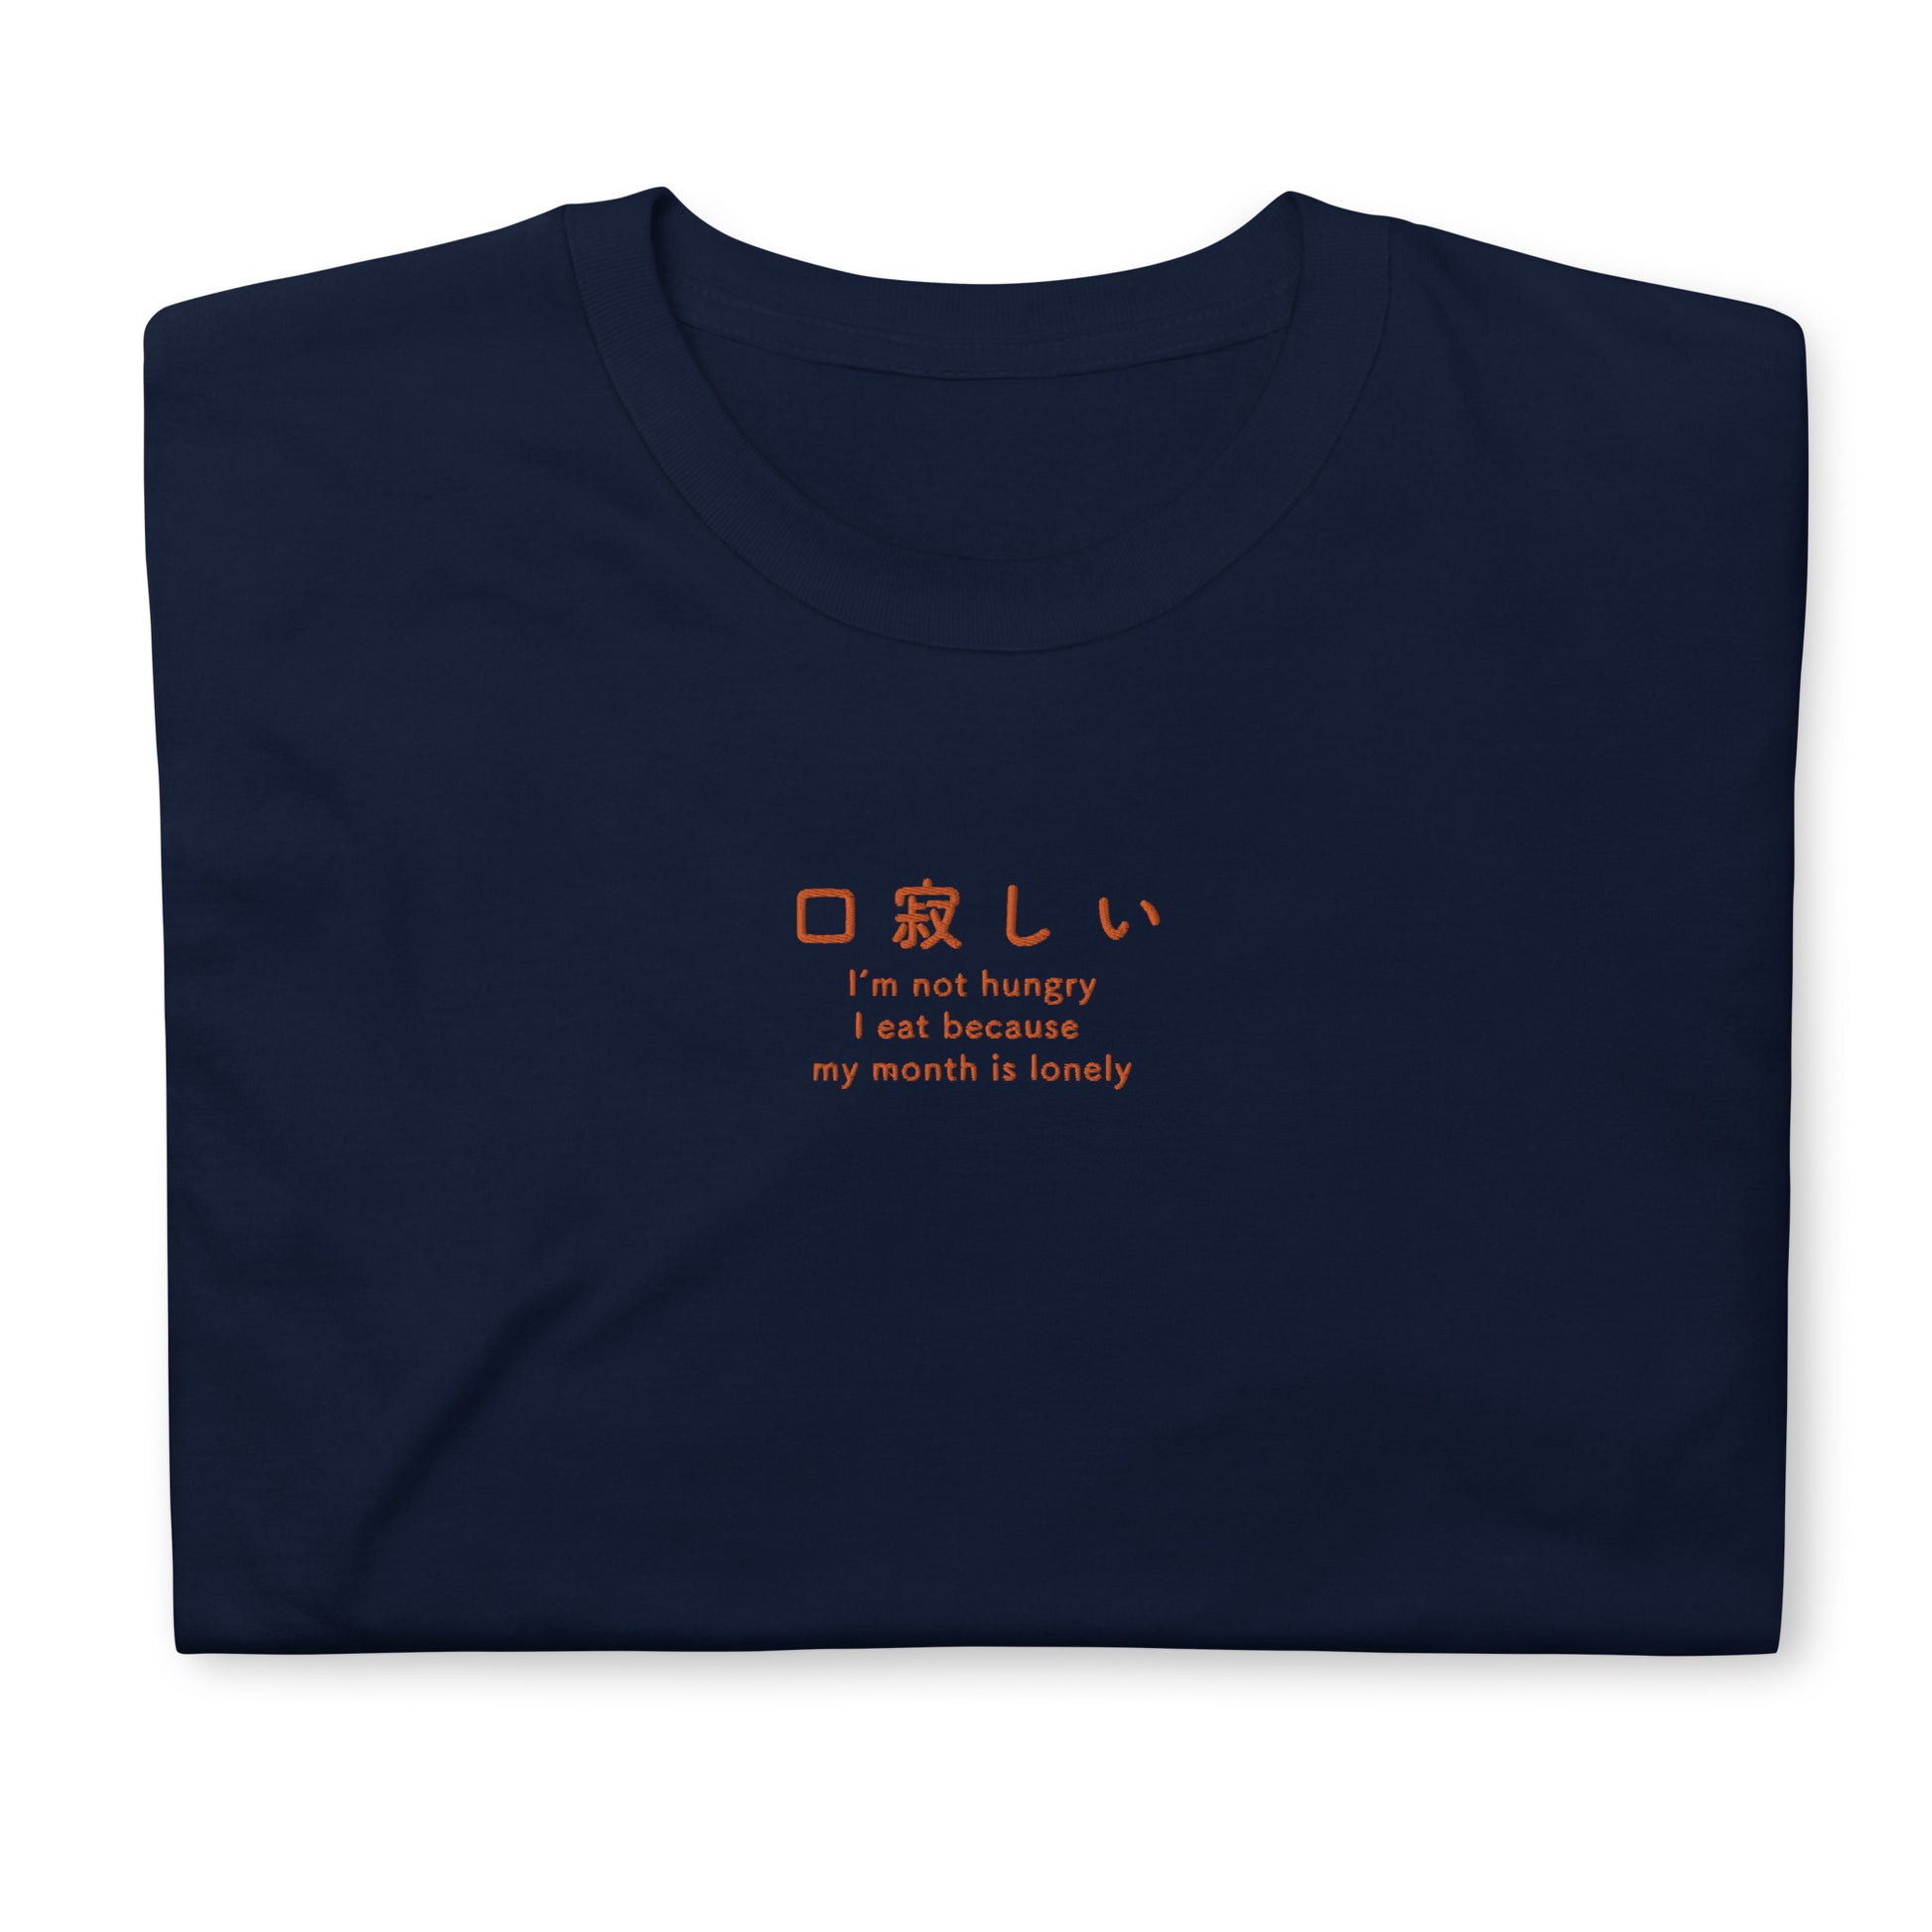 Navy High Quality Tee - Front Design with an Orange Embroidery "kuchisabishi" in Japanese and English